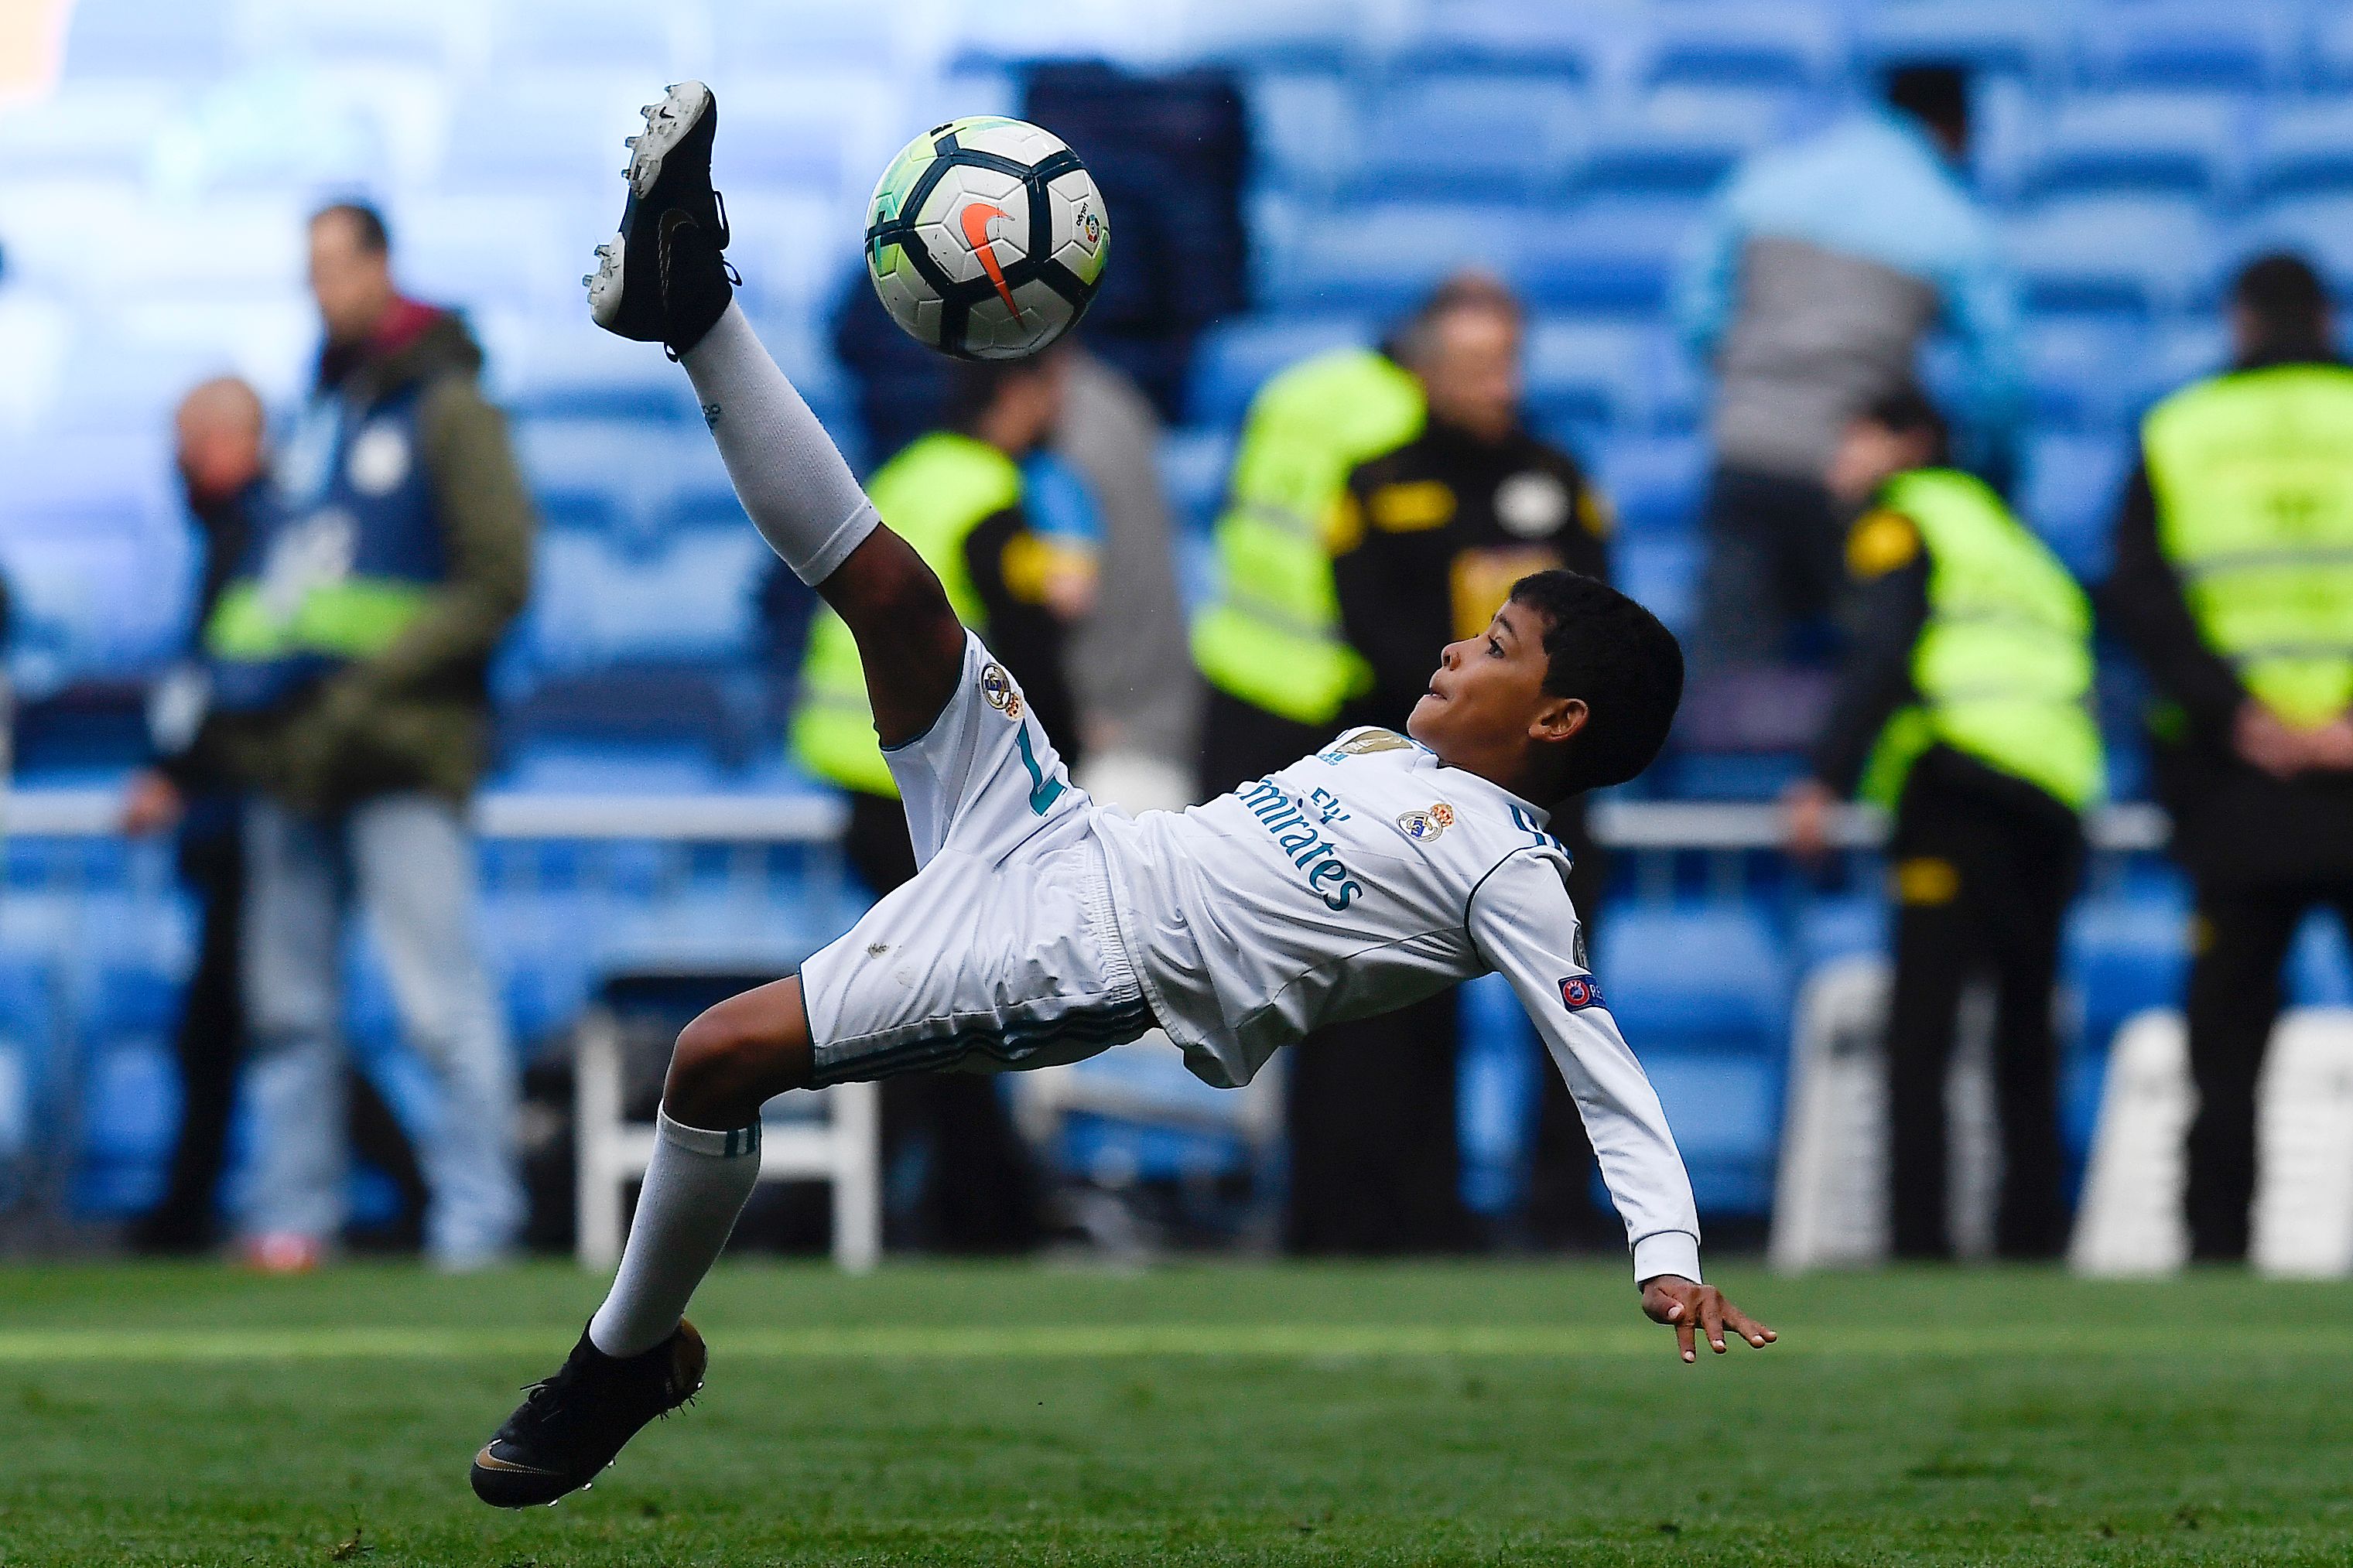 Cristiano Ronaldo Jr. playing in the Spanish league football match between Real Madrid CF and Club Atletico de Madrid on April 8, 2018 | Source: Getty Images